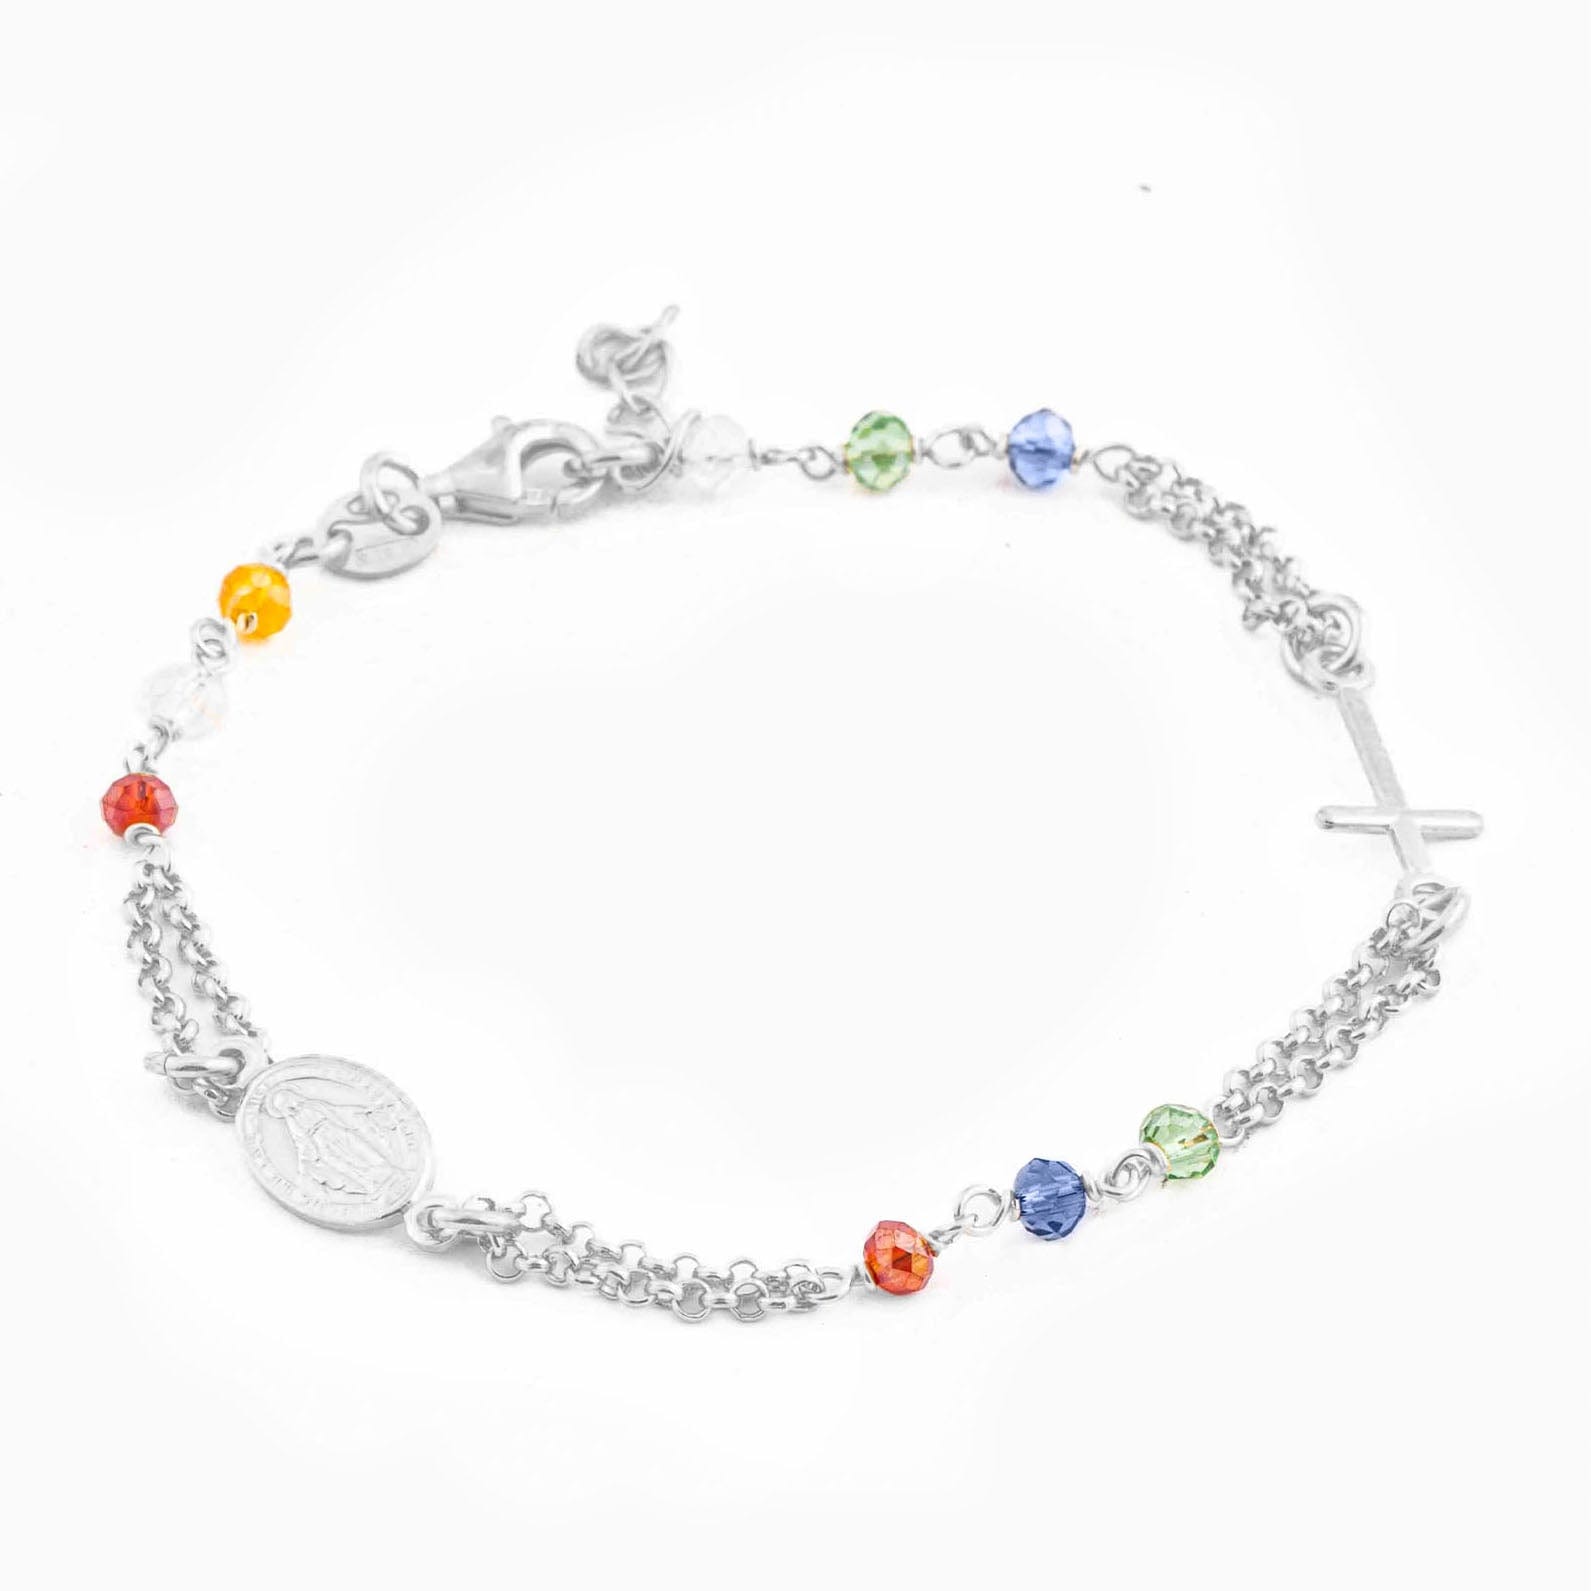 MONDO CATTOLICO Prayer Beads Rhodium / Cm 17.5 (6.9 in) / Cm 3 (1.2 in) STERLING SILVER ROSARY BRACELET DOUBLE CHAIN MULTICOLOR FACETED BEADS